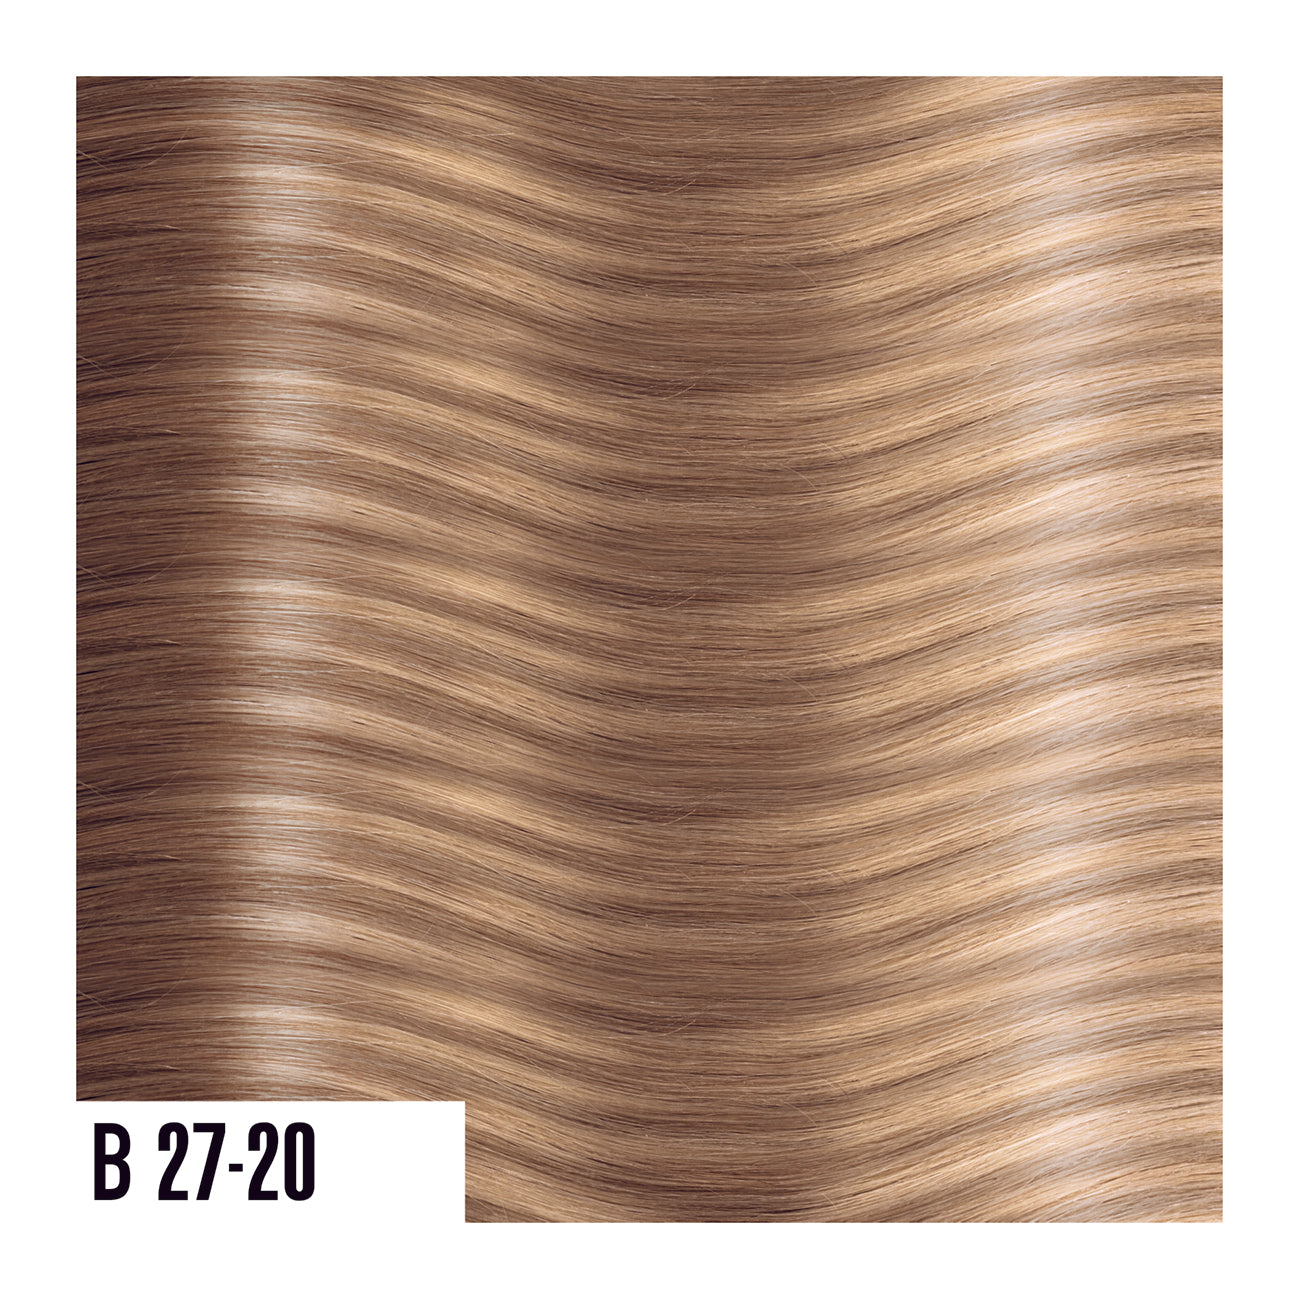 Keratin Extensions Blend of light blonde and light brown - Balayage colors are a perfect combination of natural colored roots that blends into highlighted ends.